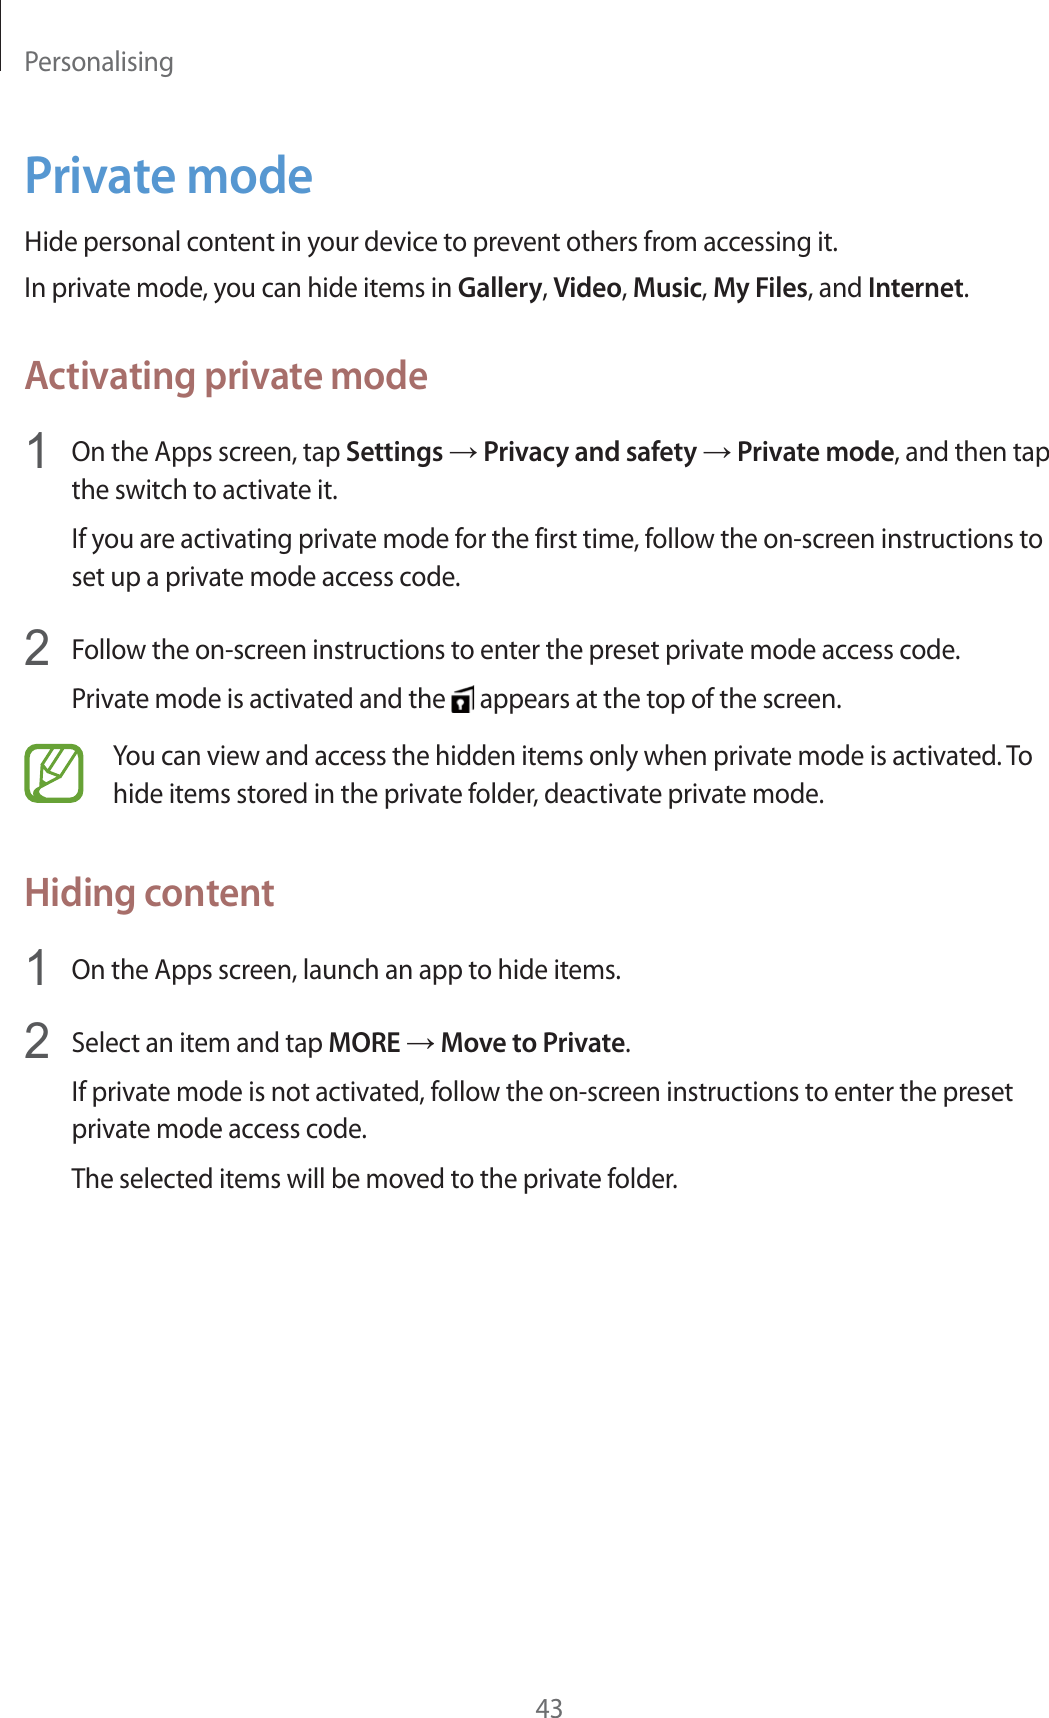 Personalising43Private modeHide personal content in your device to prevent others from accessing it.In private mode, you can hide items in Gallery, Video, Music, My Files, and Internet.Activating private mode1On the Apps screen, tap Settings ĺ Privacy and safety ĺ Private mode, and then tap the switch to activate it.If you are activating private mode for the first time, follow the on-screen instructions to set up a private mode access code.2Follow the on-screen instructions to enter the preset private mode access code.Private mode is activated and the   appears at the top of the screen.You can view and access the hidden items only when private mode is activated. To hide items stored in the private folder, deactivate private mode.Hiding content1On the Apps screen, launch an app to hide items.2Select an item and tap MORE ĺ Move to Private.If private mode is not activated, follow the on-screen instructions to enter the preset private mode access code.The selected items will be moved to the private folder.